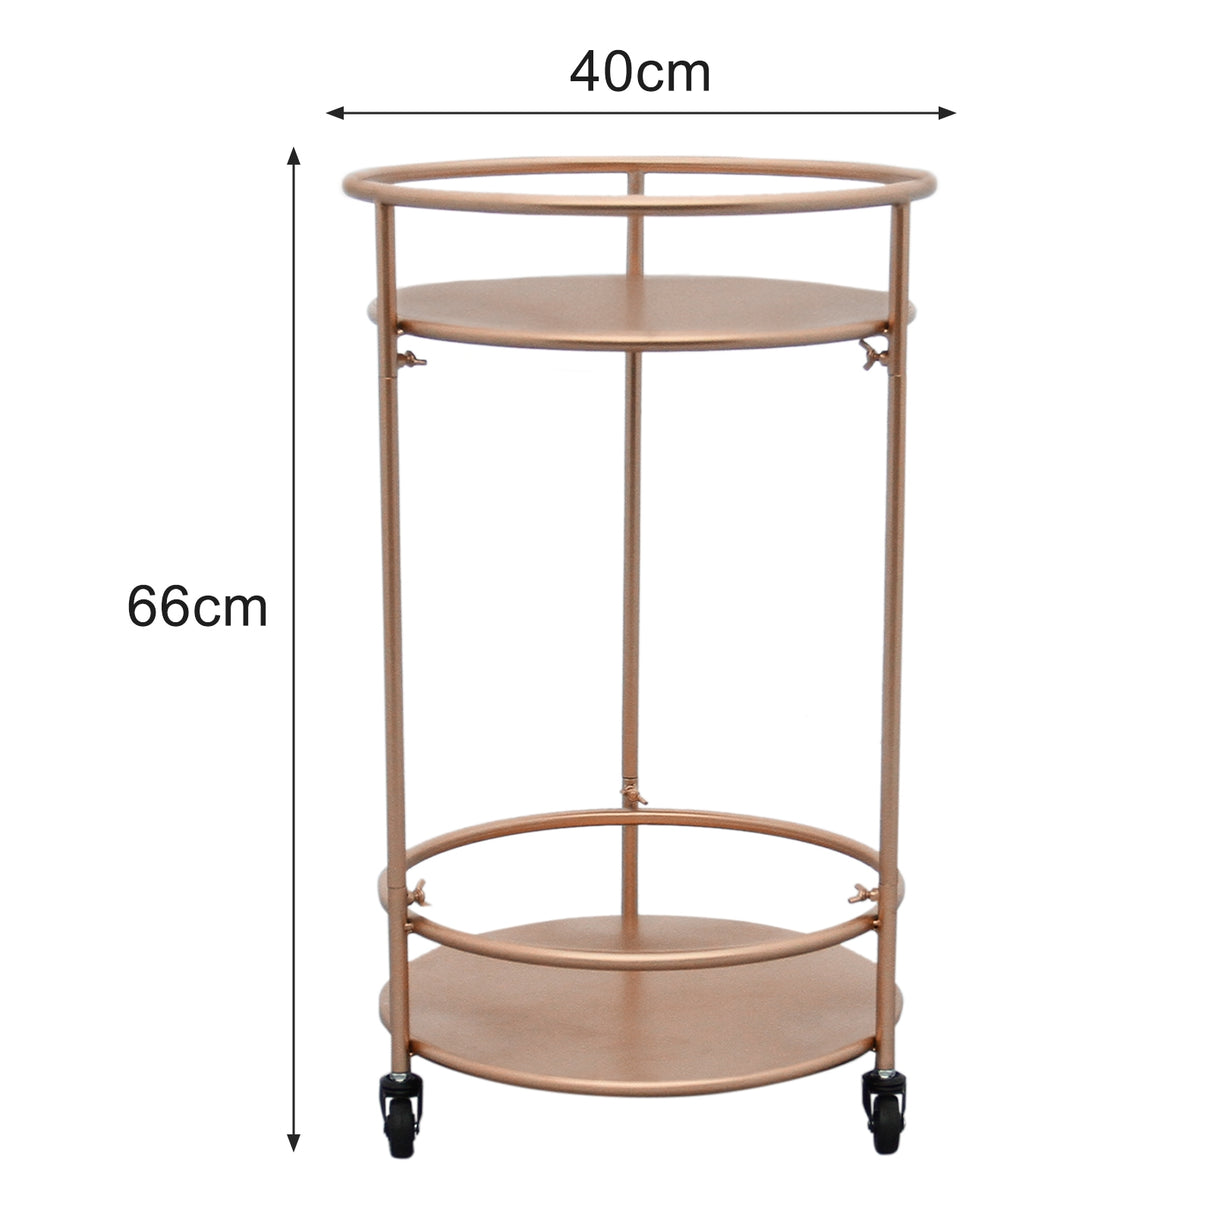 Rose Gold Drinks Trolley Bar Cart - Small - Used - Acceptable